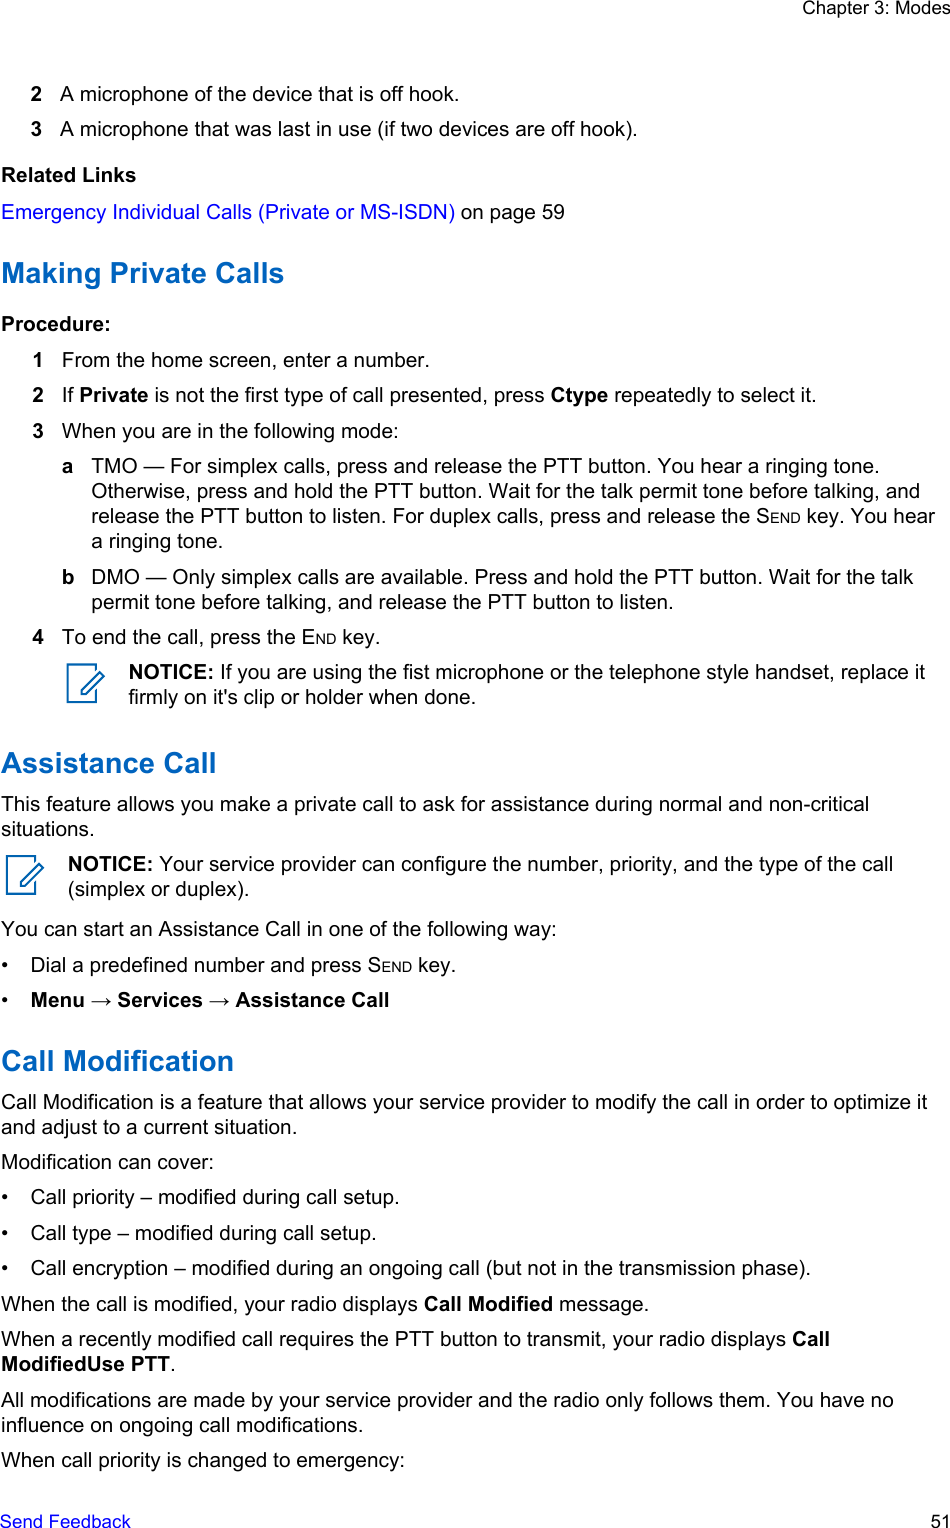 2A microphone of the device that is off hook.3A microphone that was last in use (if two devices are off hook).Related LinksEmergency Individual Calls (Private or MS-ISDN) on page 59Making Private CallsProcedure:1From the home screen, enter a number.2If Private is not the first type of call presented, press Ctype repeatedly to select it.3When you are in the following mode:aTMO — For simplex calls, press and release the PTT button. You hear a ringing tone.Otherwise, press and hold the PTT button. Wait for the talk permit tone before talking, andrelease the PTT button to listen. For duplex calls, press and release the SEND key. You heara ringing tone.bDMO — Only simplex calls are available. Press and hold the PTT button. Wait for the talkpermit tone before talking, and release the PTT button to listen.4To end the call, press the END key.NOTICE: If you are using the fist microphone or the telephone style handset, replace itfirmly on it&apos;s clip or holder when done.Assistance CallThis feature allows you make a private call to ask for assistance during normal and non-criticalsituations.NOTICE: Your service provider can configure the number, priority, and the type of the call(simplex or duplex).You can start an Assistance Call in one of the following way:• Dial a predefined number and press SEND key.•Menu → Services → Assistance CallCall ModificationCall Modification is a feature that allows your service provider to modify the call in order to optimize itand adjust to a current situation.Modification can cover:• Call priority – modified during call setup.• Call type – modified during call setup.• Call encryption – modified during an ongoing call (but not in the transmission phase).When the call is modified, your radio displays Call Modified message.When a recently modified call requires the PTT button to transmit, your radio displays CallModifiedUse PTT.All modifications are made by your service provider and the radio only follows them. You have noinfluence on ongoing call modifications.When call priority is changed to emergency:Chapter 3: ModesSend Feedback   51